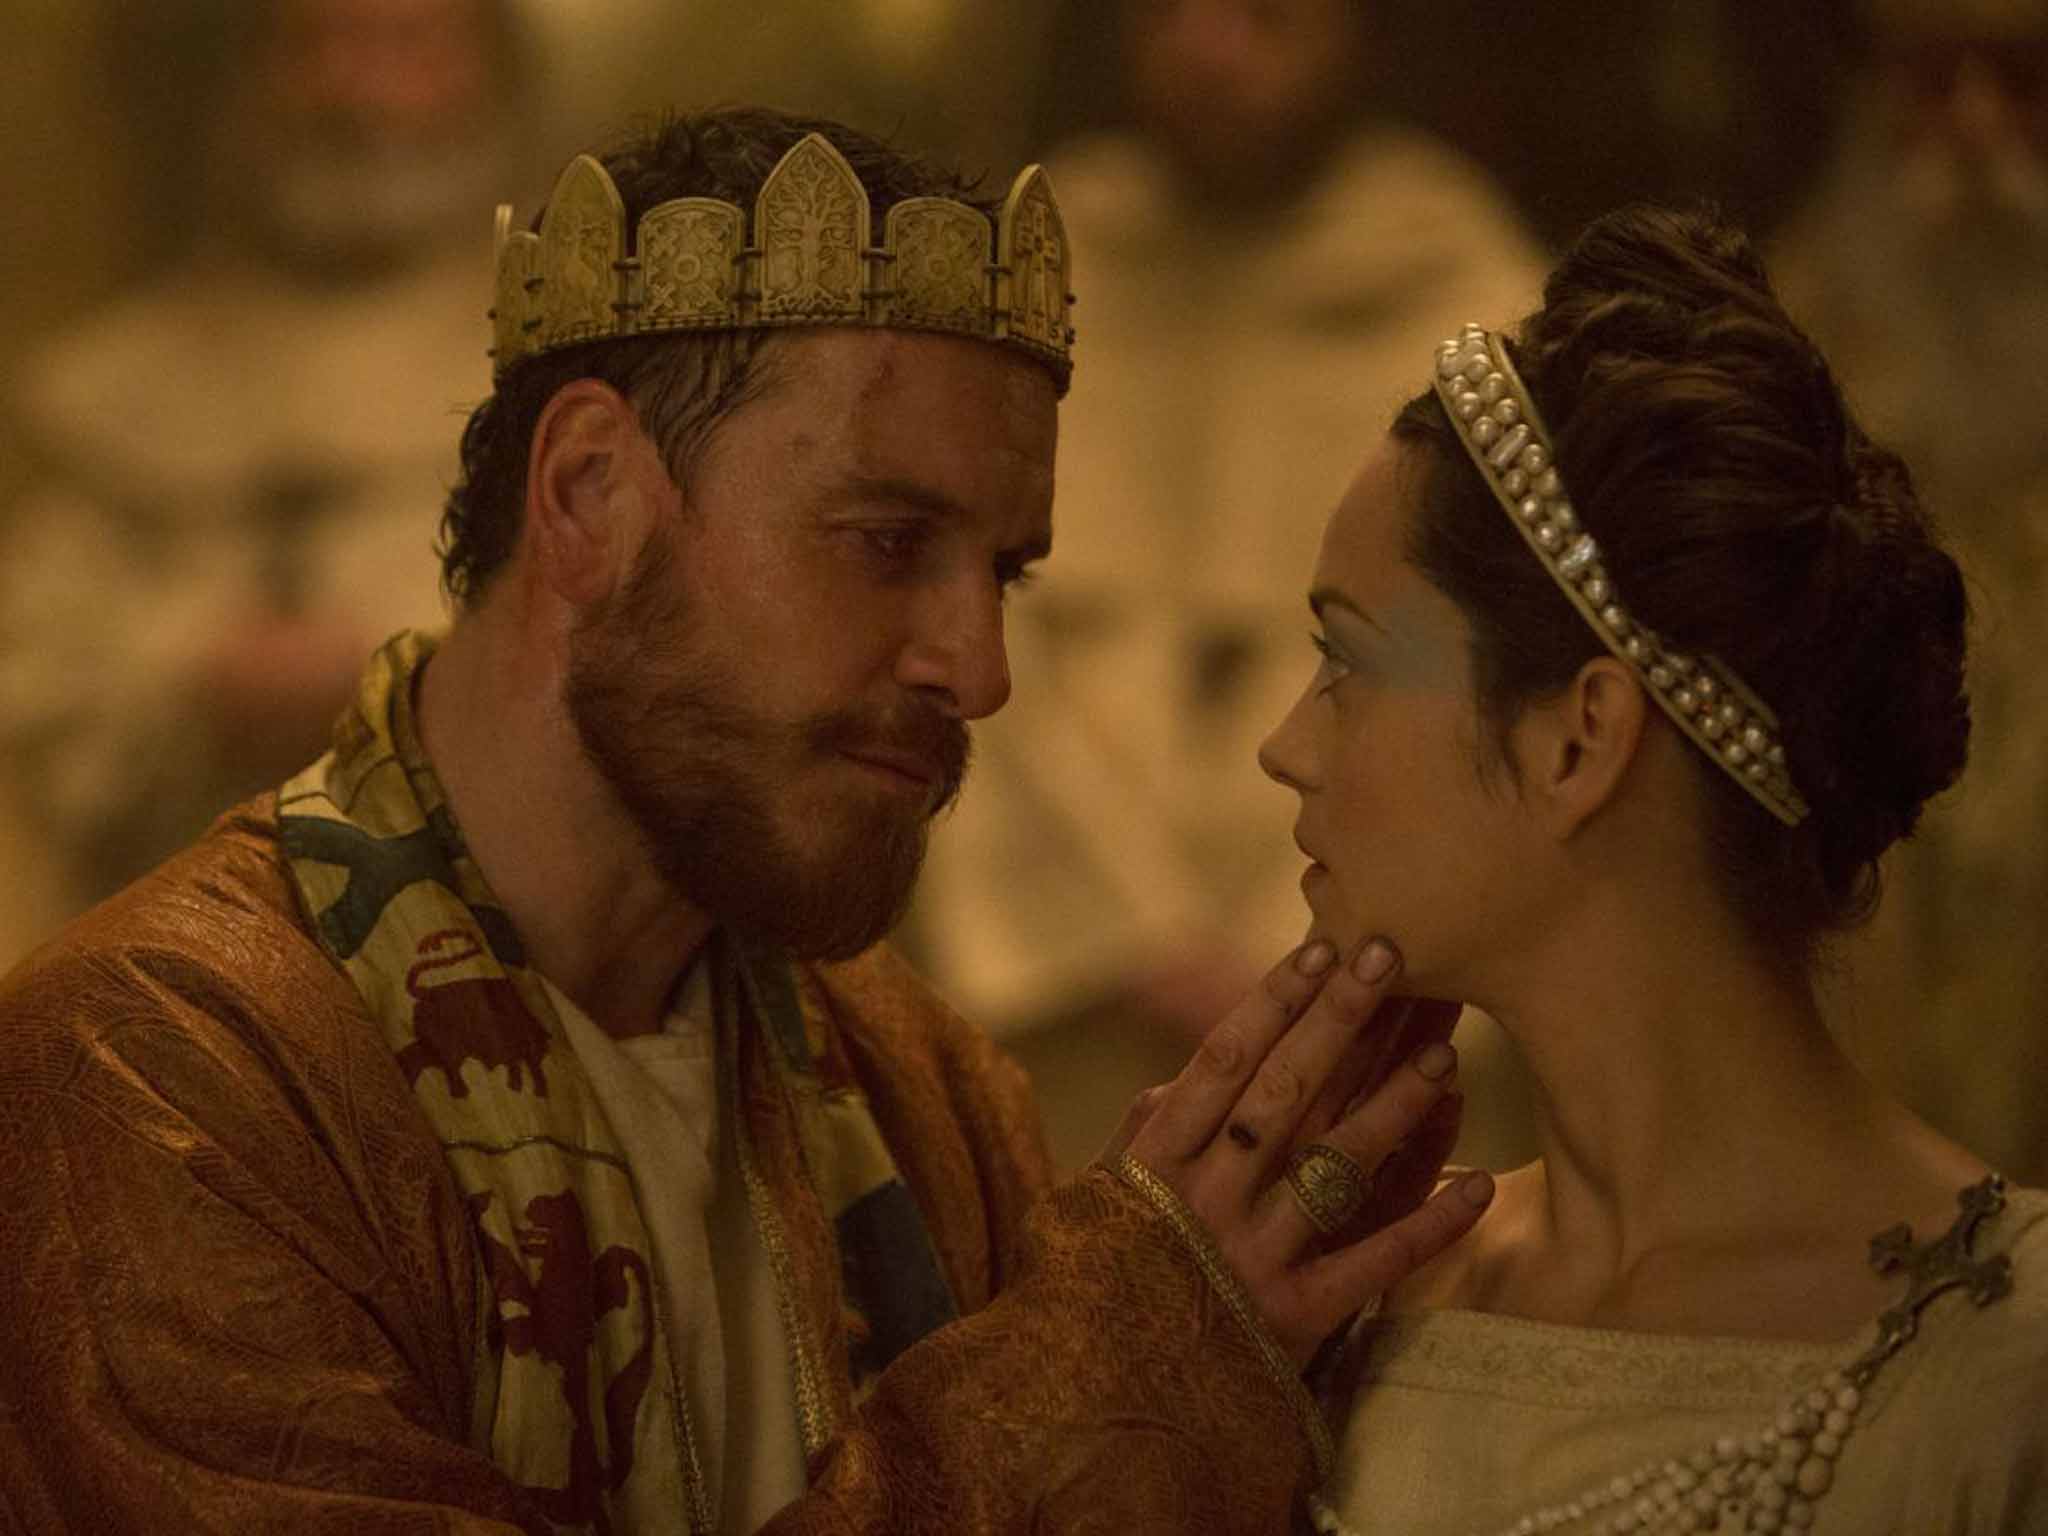 Toil and trouble: Michael Fassbender and Marion Cotillard in the latest 'Macbeth'